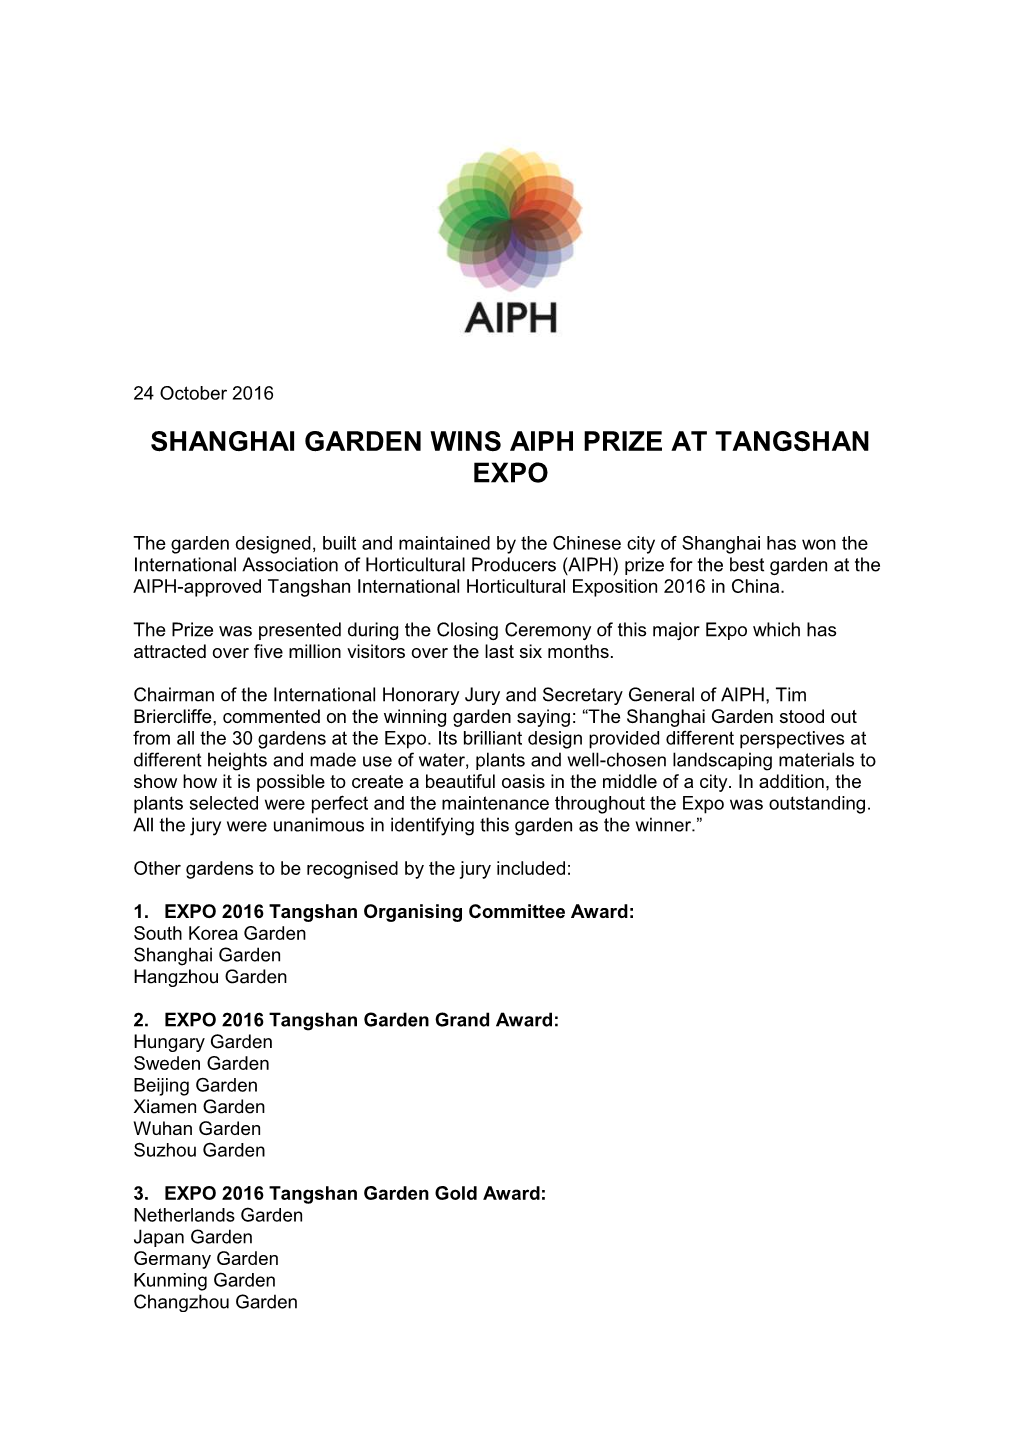 Shanghai Garden Wins Aiph Prize at Tangshan Expo